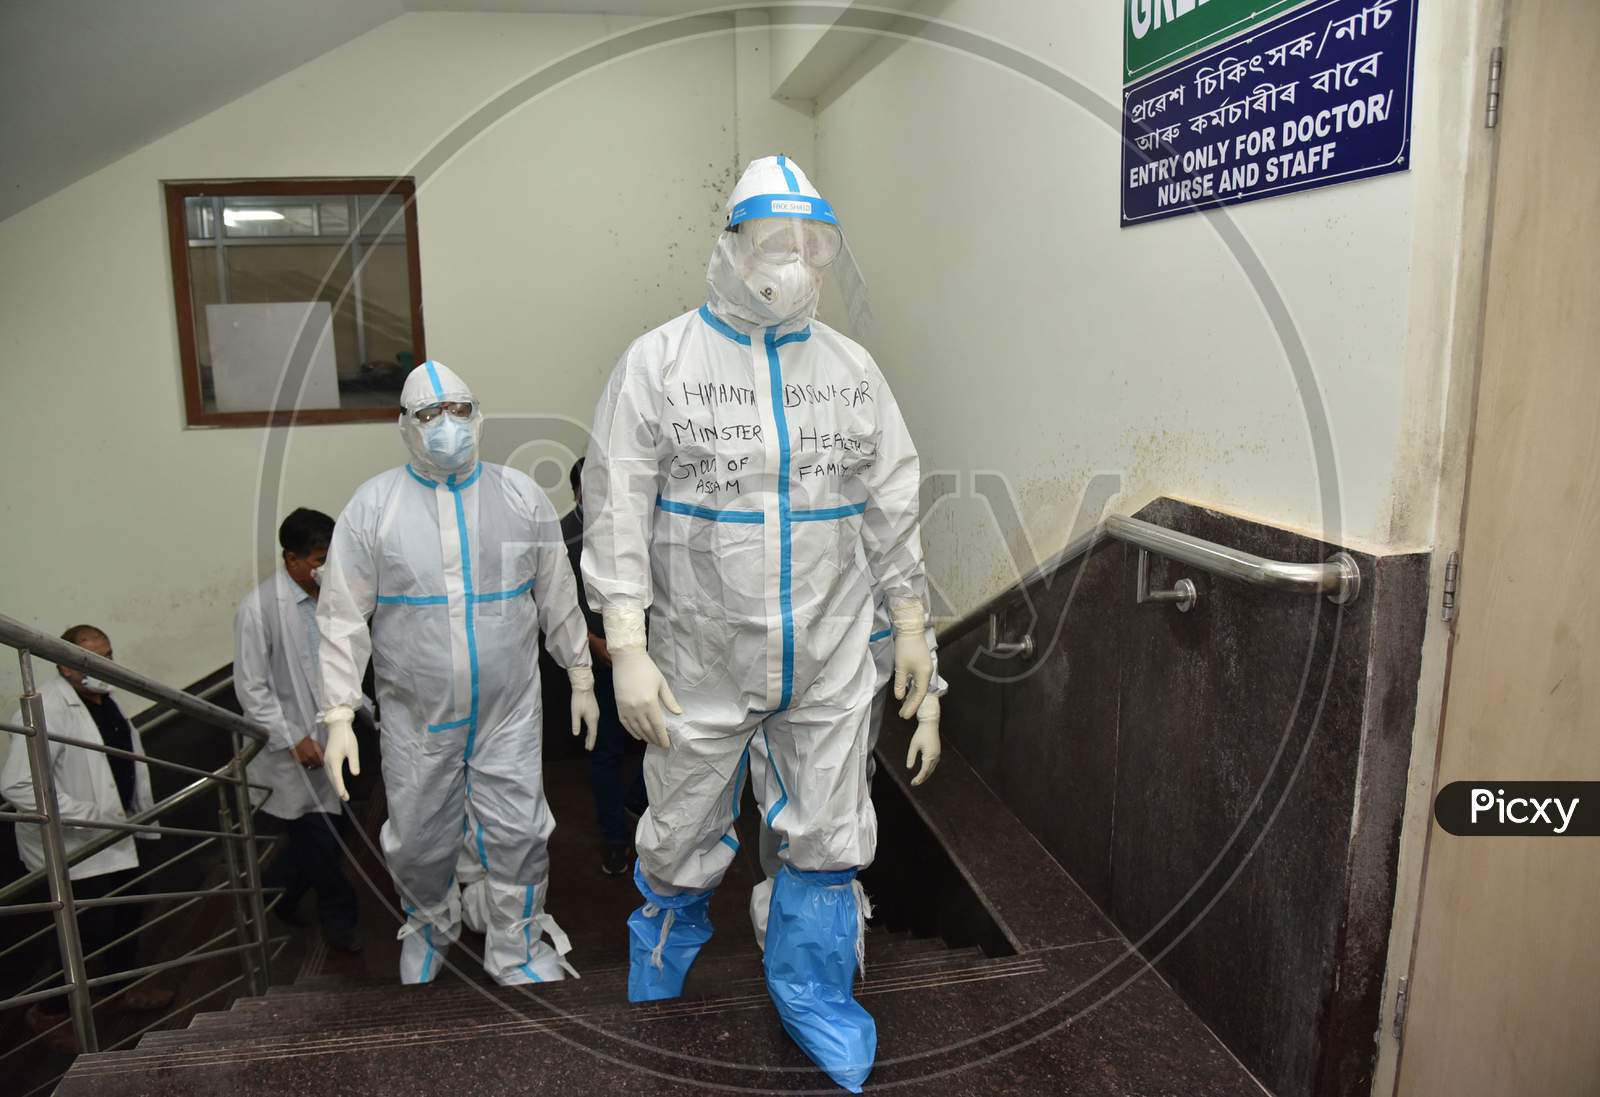 Assam State Finance, Health and Family Welfare Minister Himanta Biswa Sarma with officials in PPE kits visits Gauhati Medical College and Hospital (GMCH) to check the Covid19 positive patients their treatments and facilities, in Guwahati on Sunday, September 13, 2020.